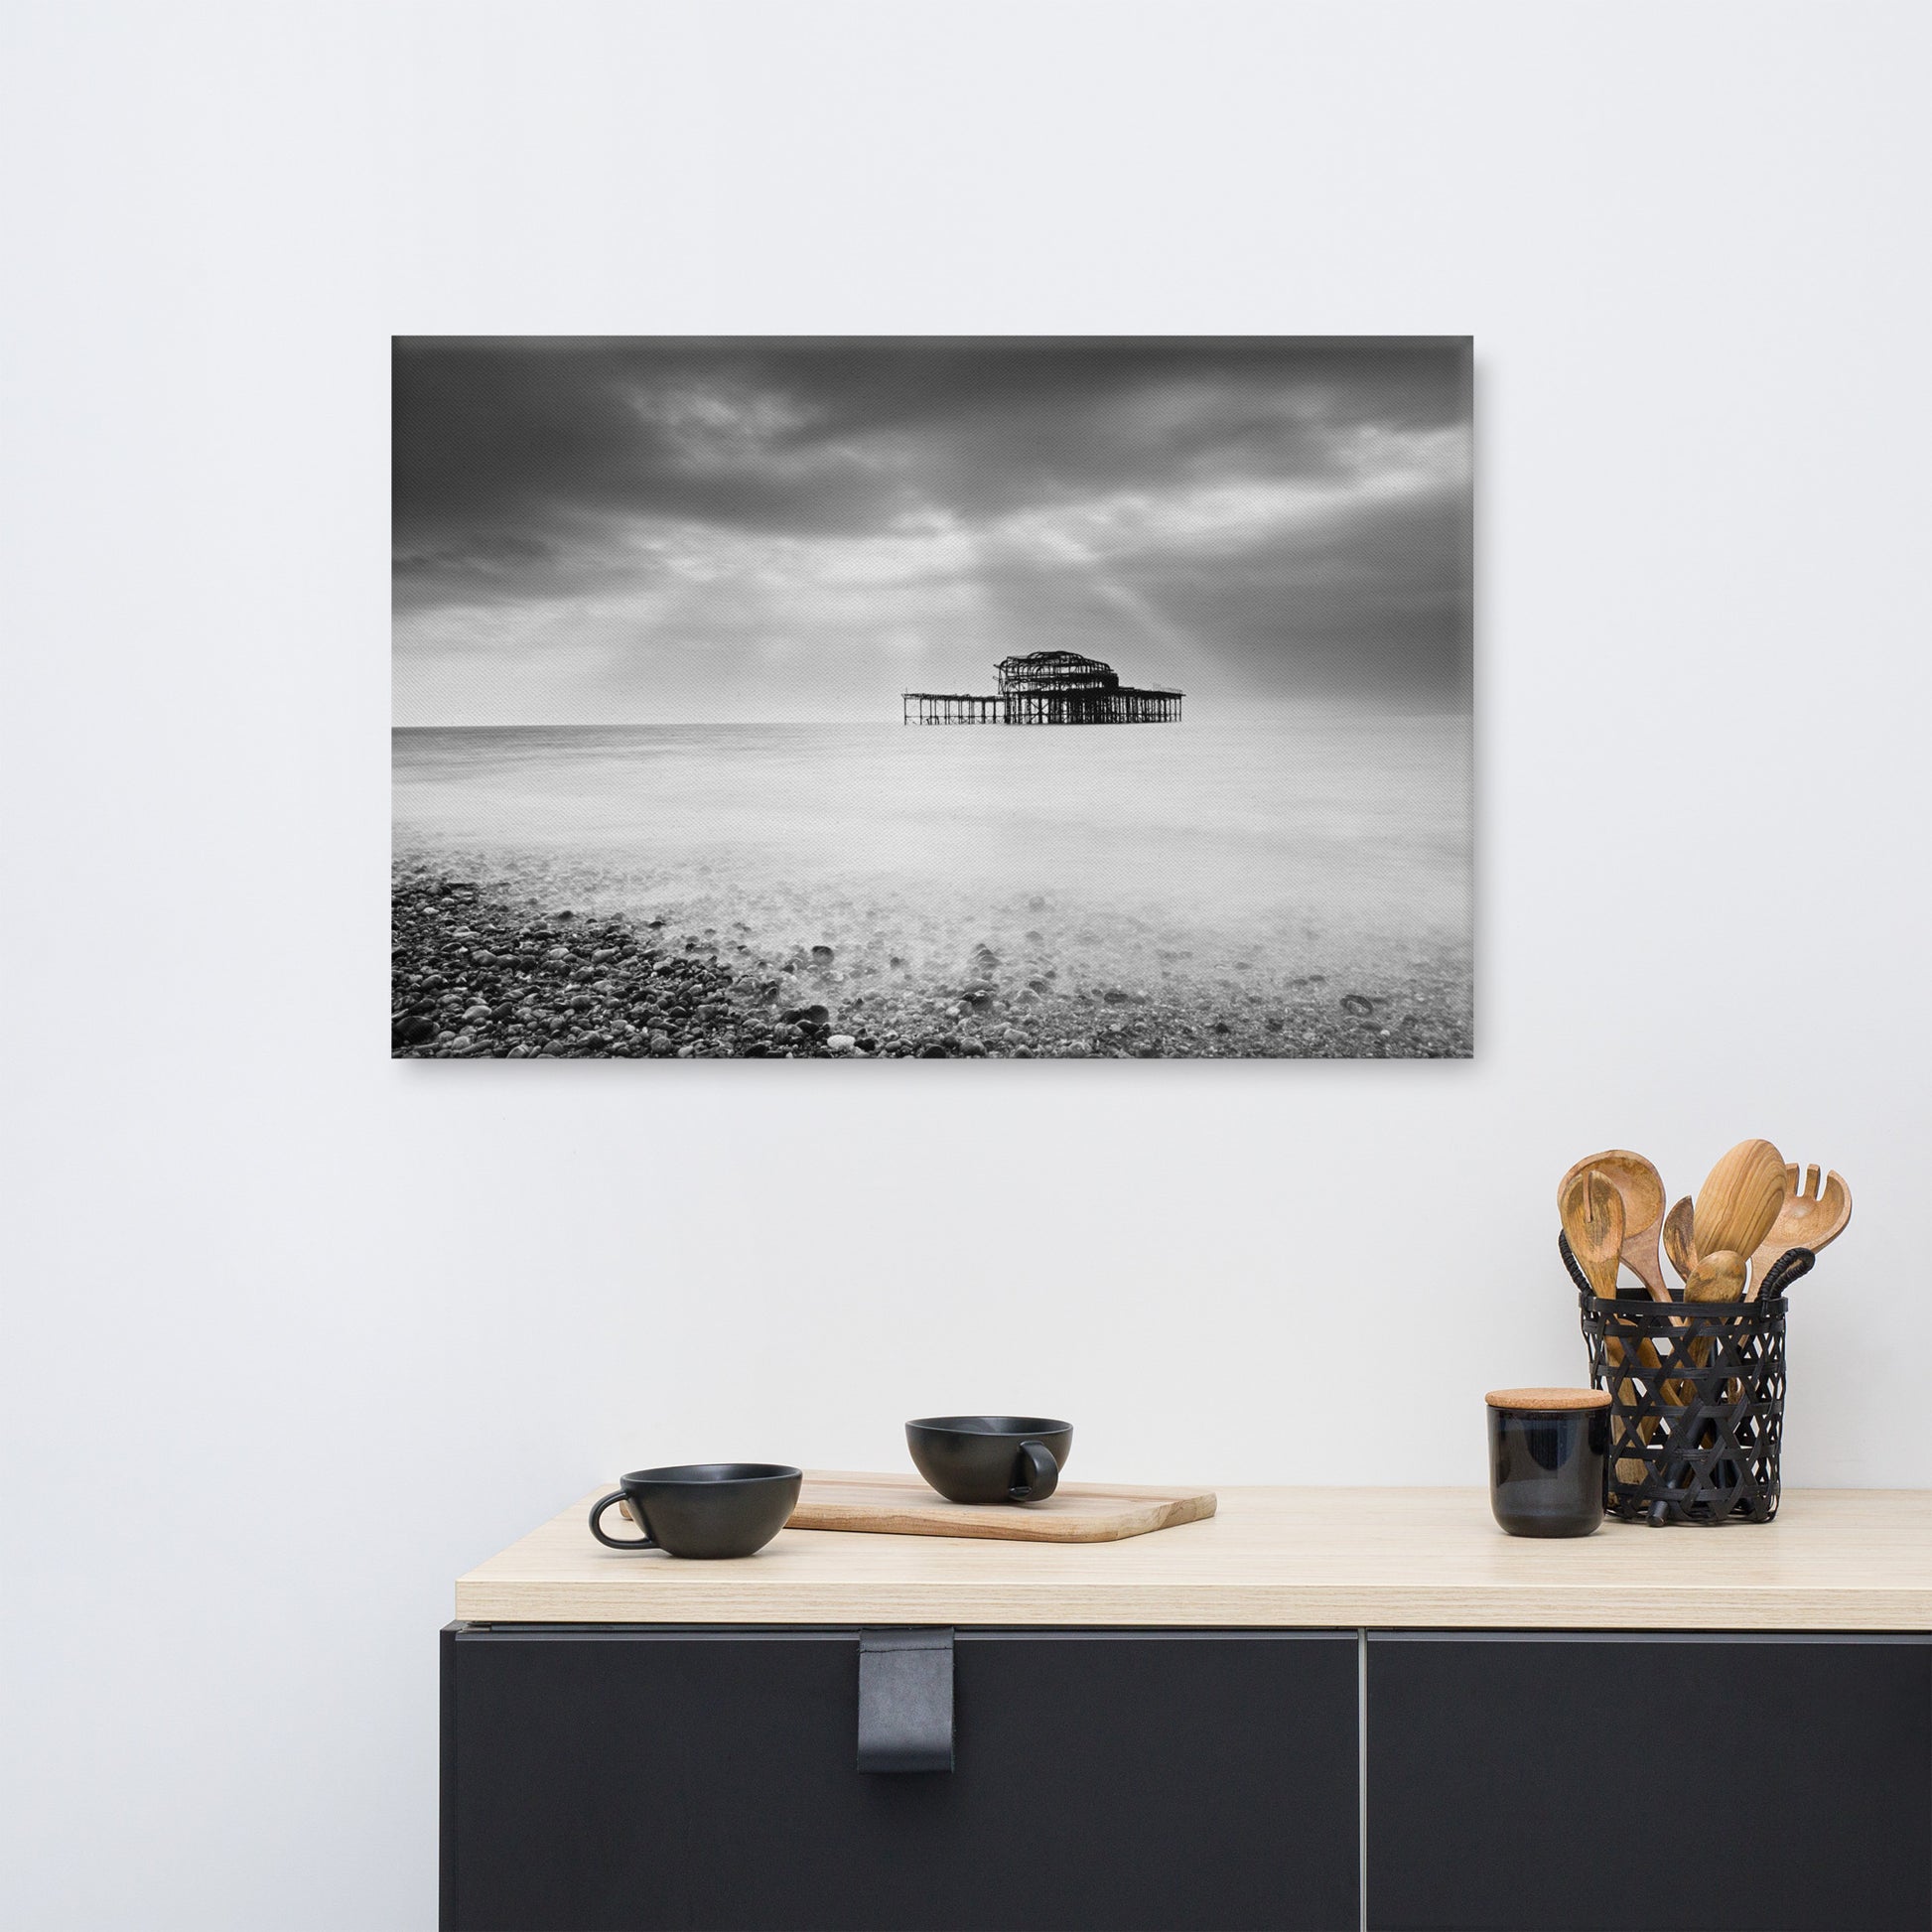 Art For Front Room: Abandoned West Pier Black and White - Coastal / Beach / Seascape / Nature / Landscape Photo Canvas Wall Art Print - Artwork - Wall Decor